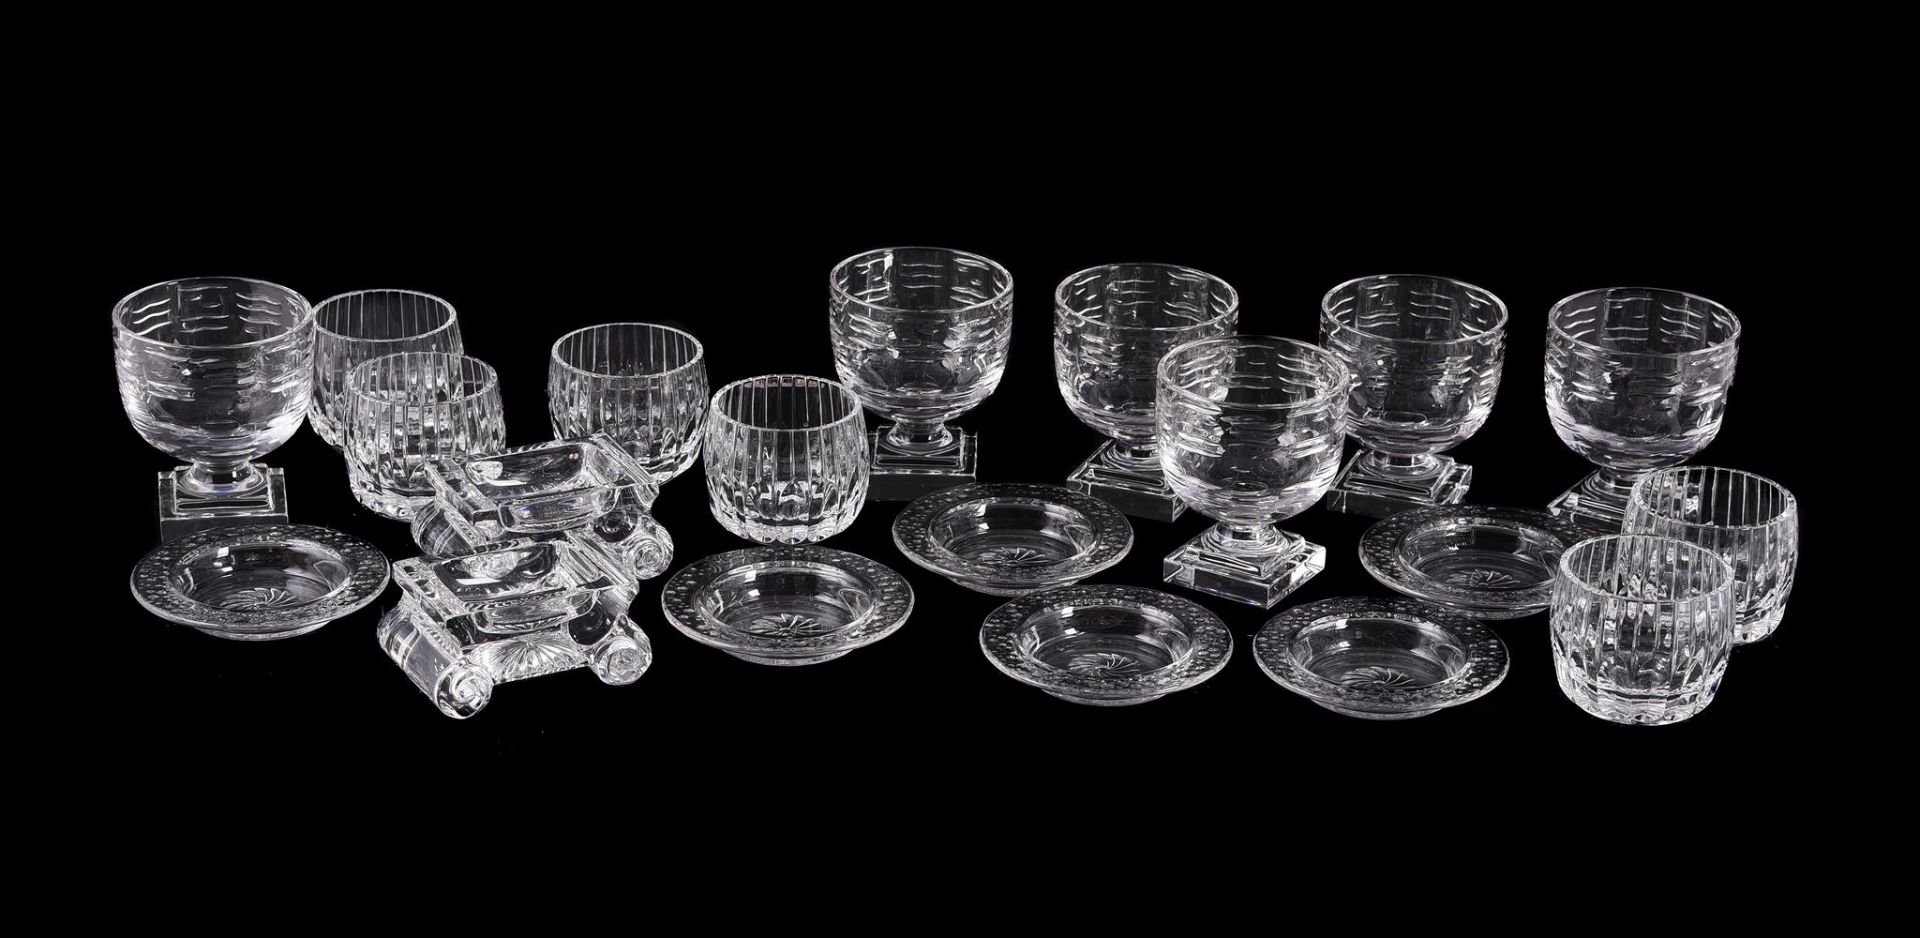 WILLIAM YEOWARD; A LARGE PEDESTAL CAVIAR SERVING BOWL AND SIX SMALLER CAVIAR BOWLS AND COVERS